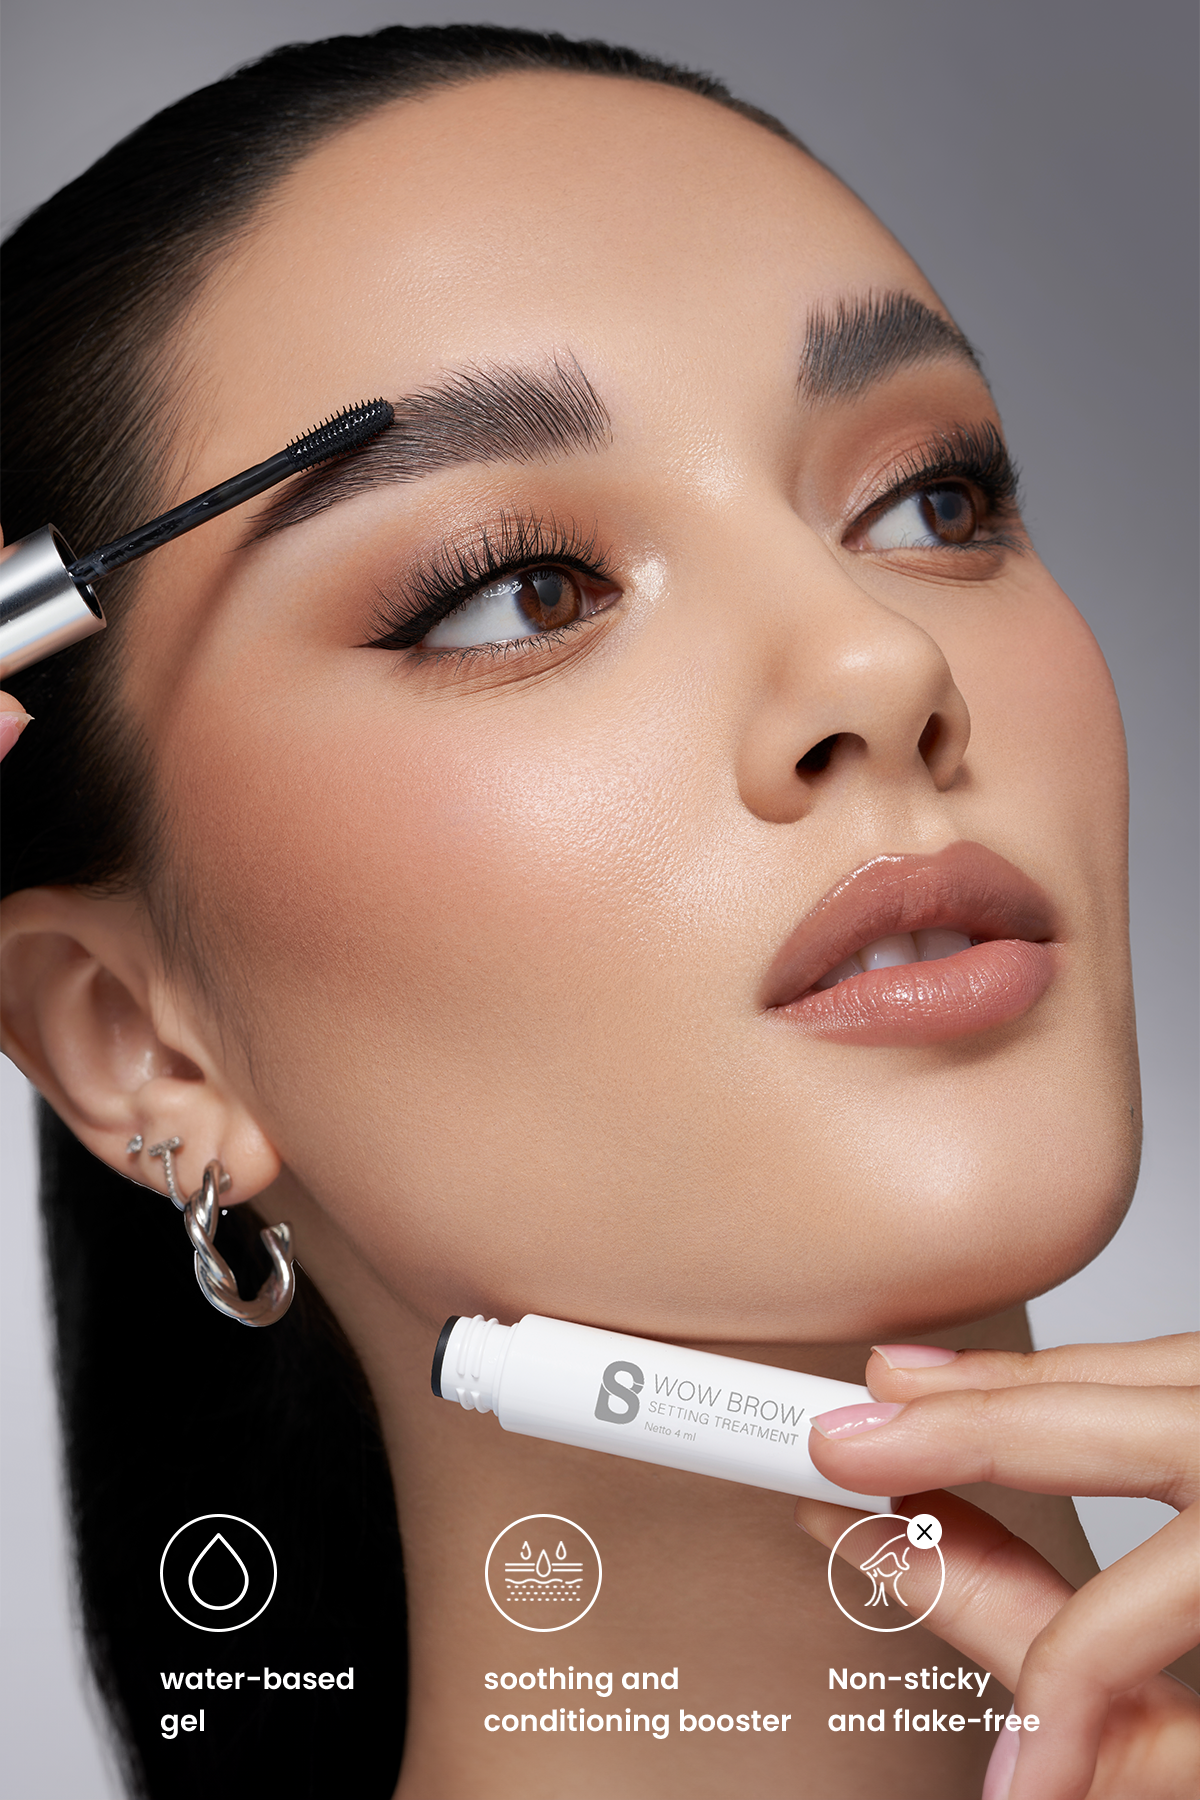 BSB - Wow Brow Setting Treatment